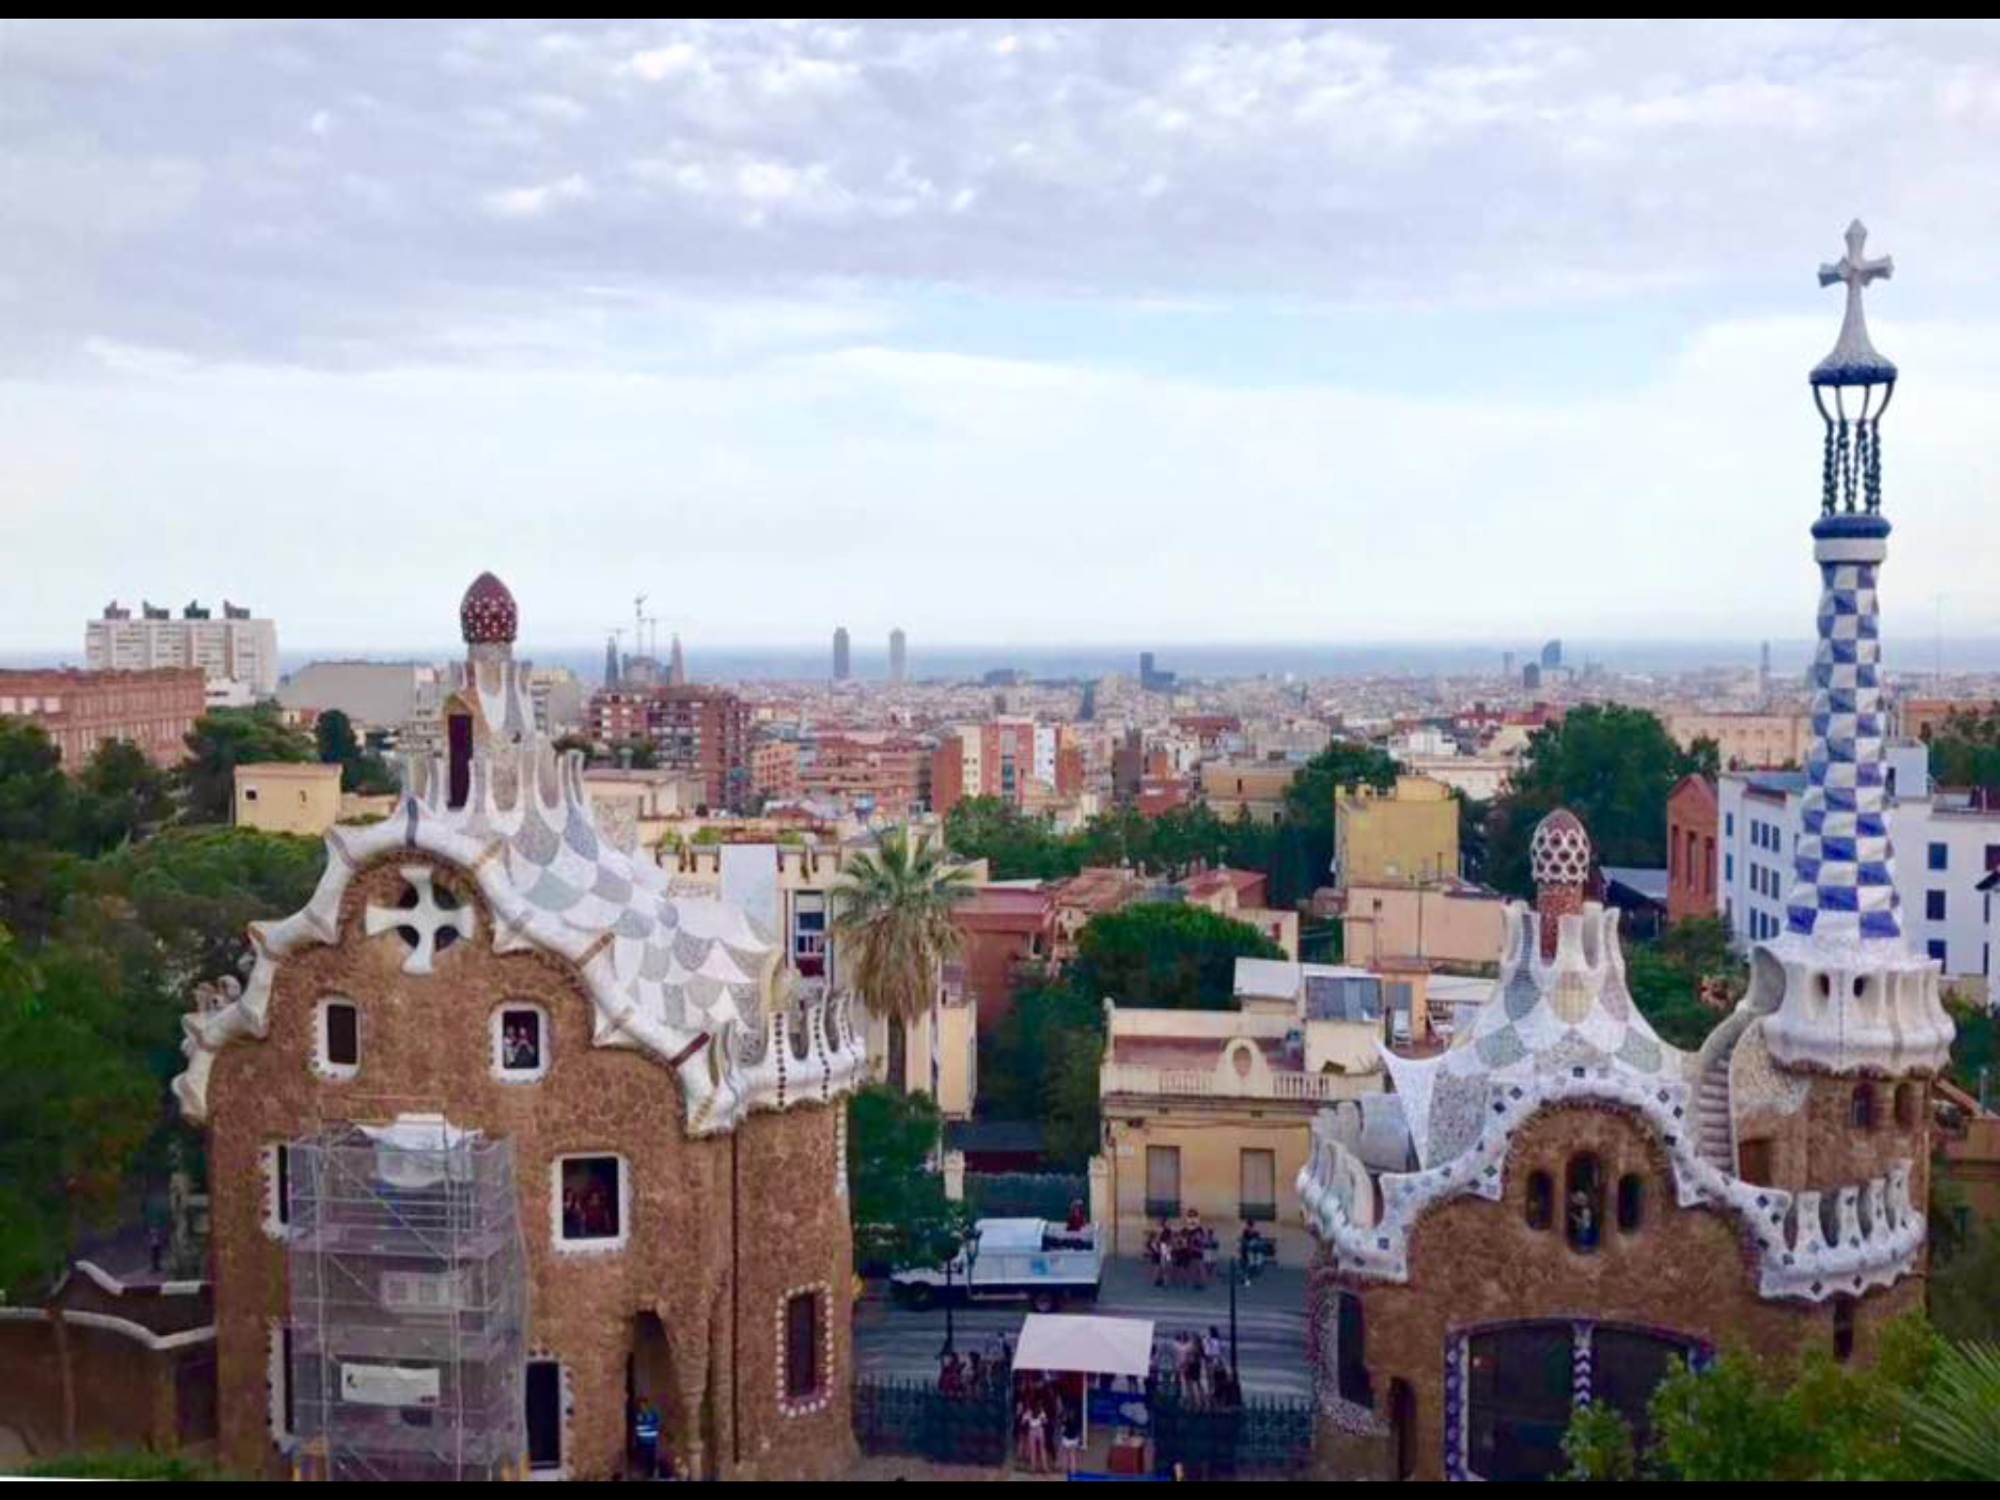 Barcelona.<br/>
View from Park Guel.